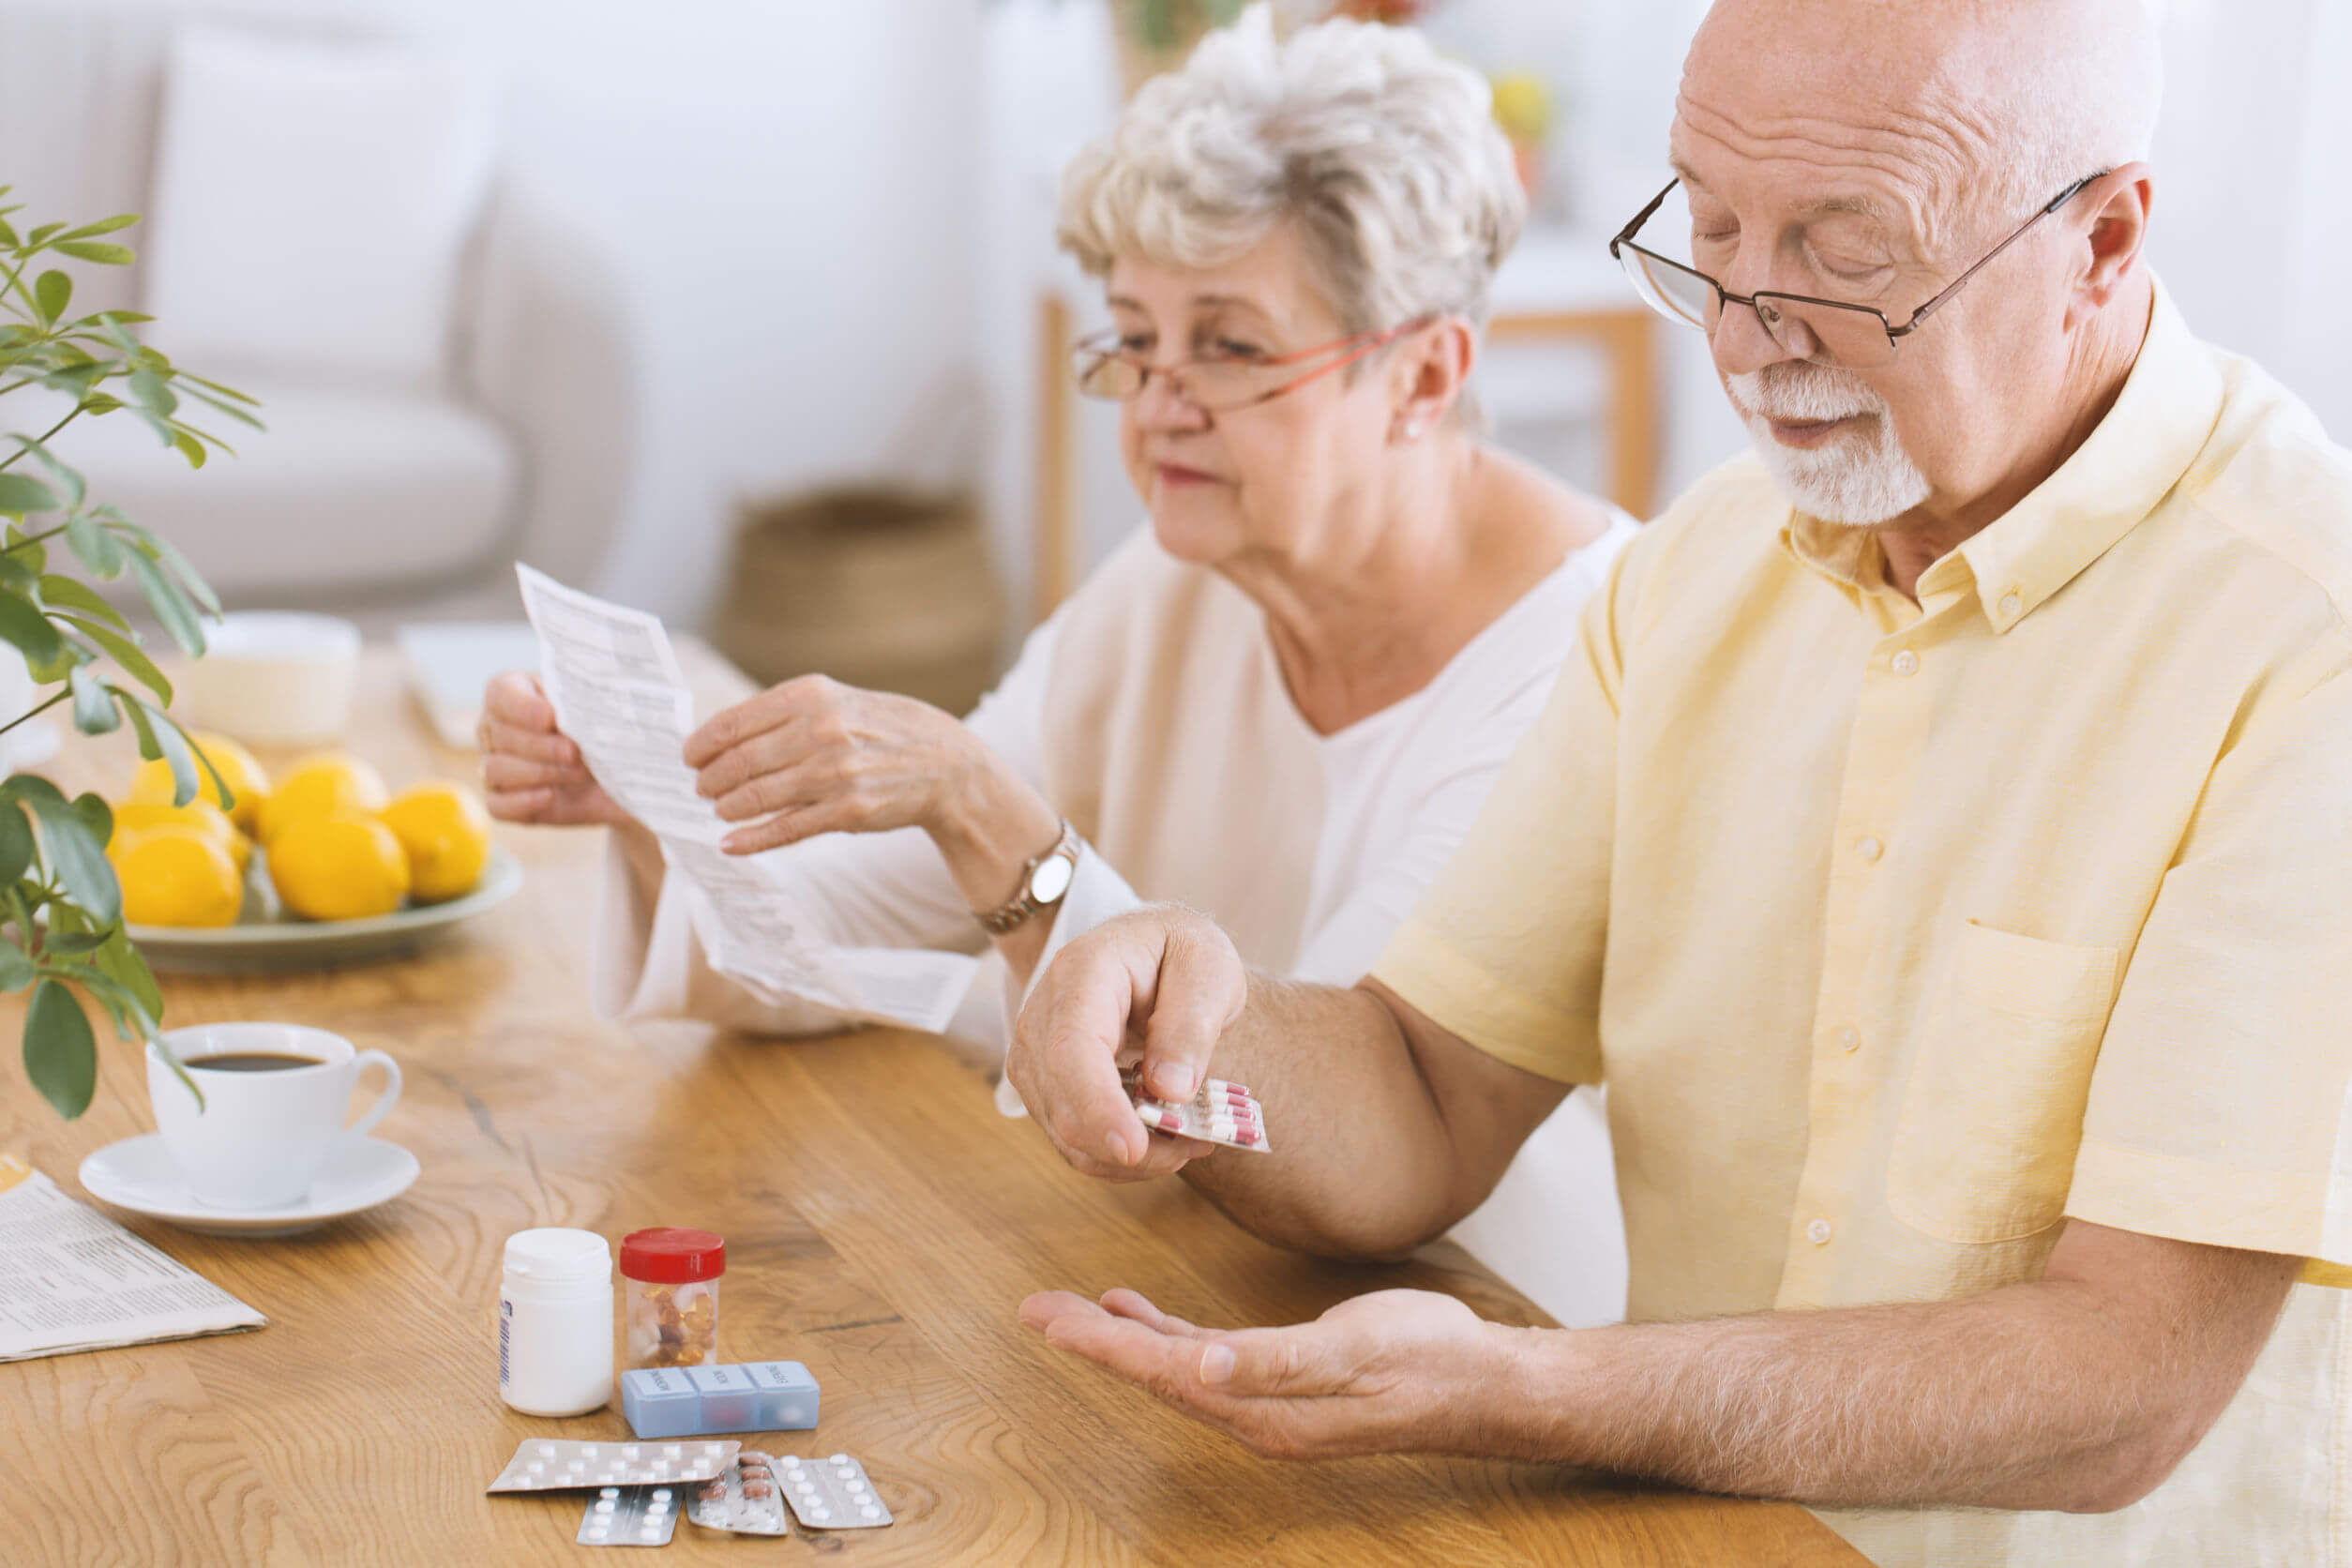 The treatment of Alzheimer's disease includes medications.